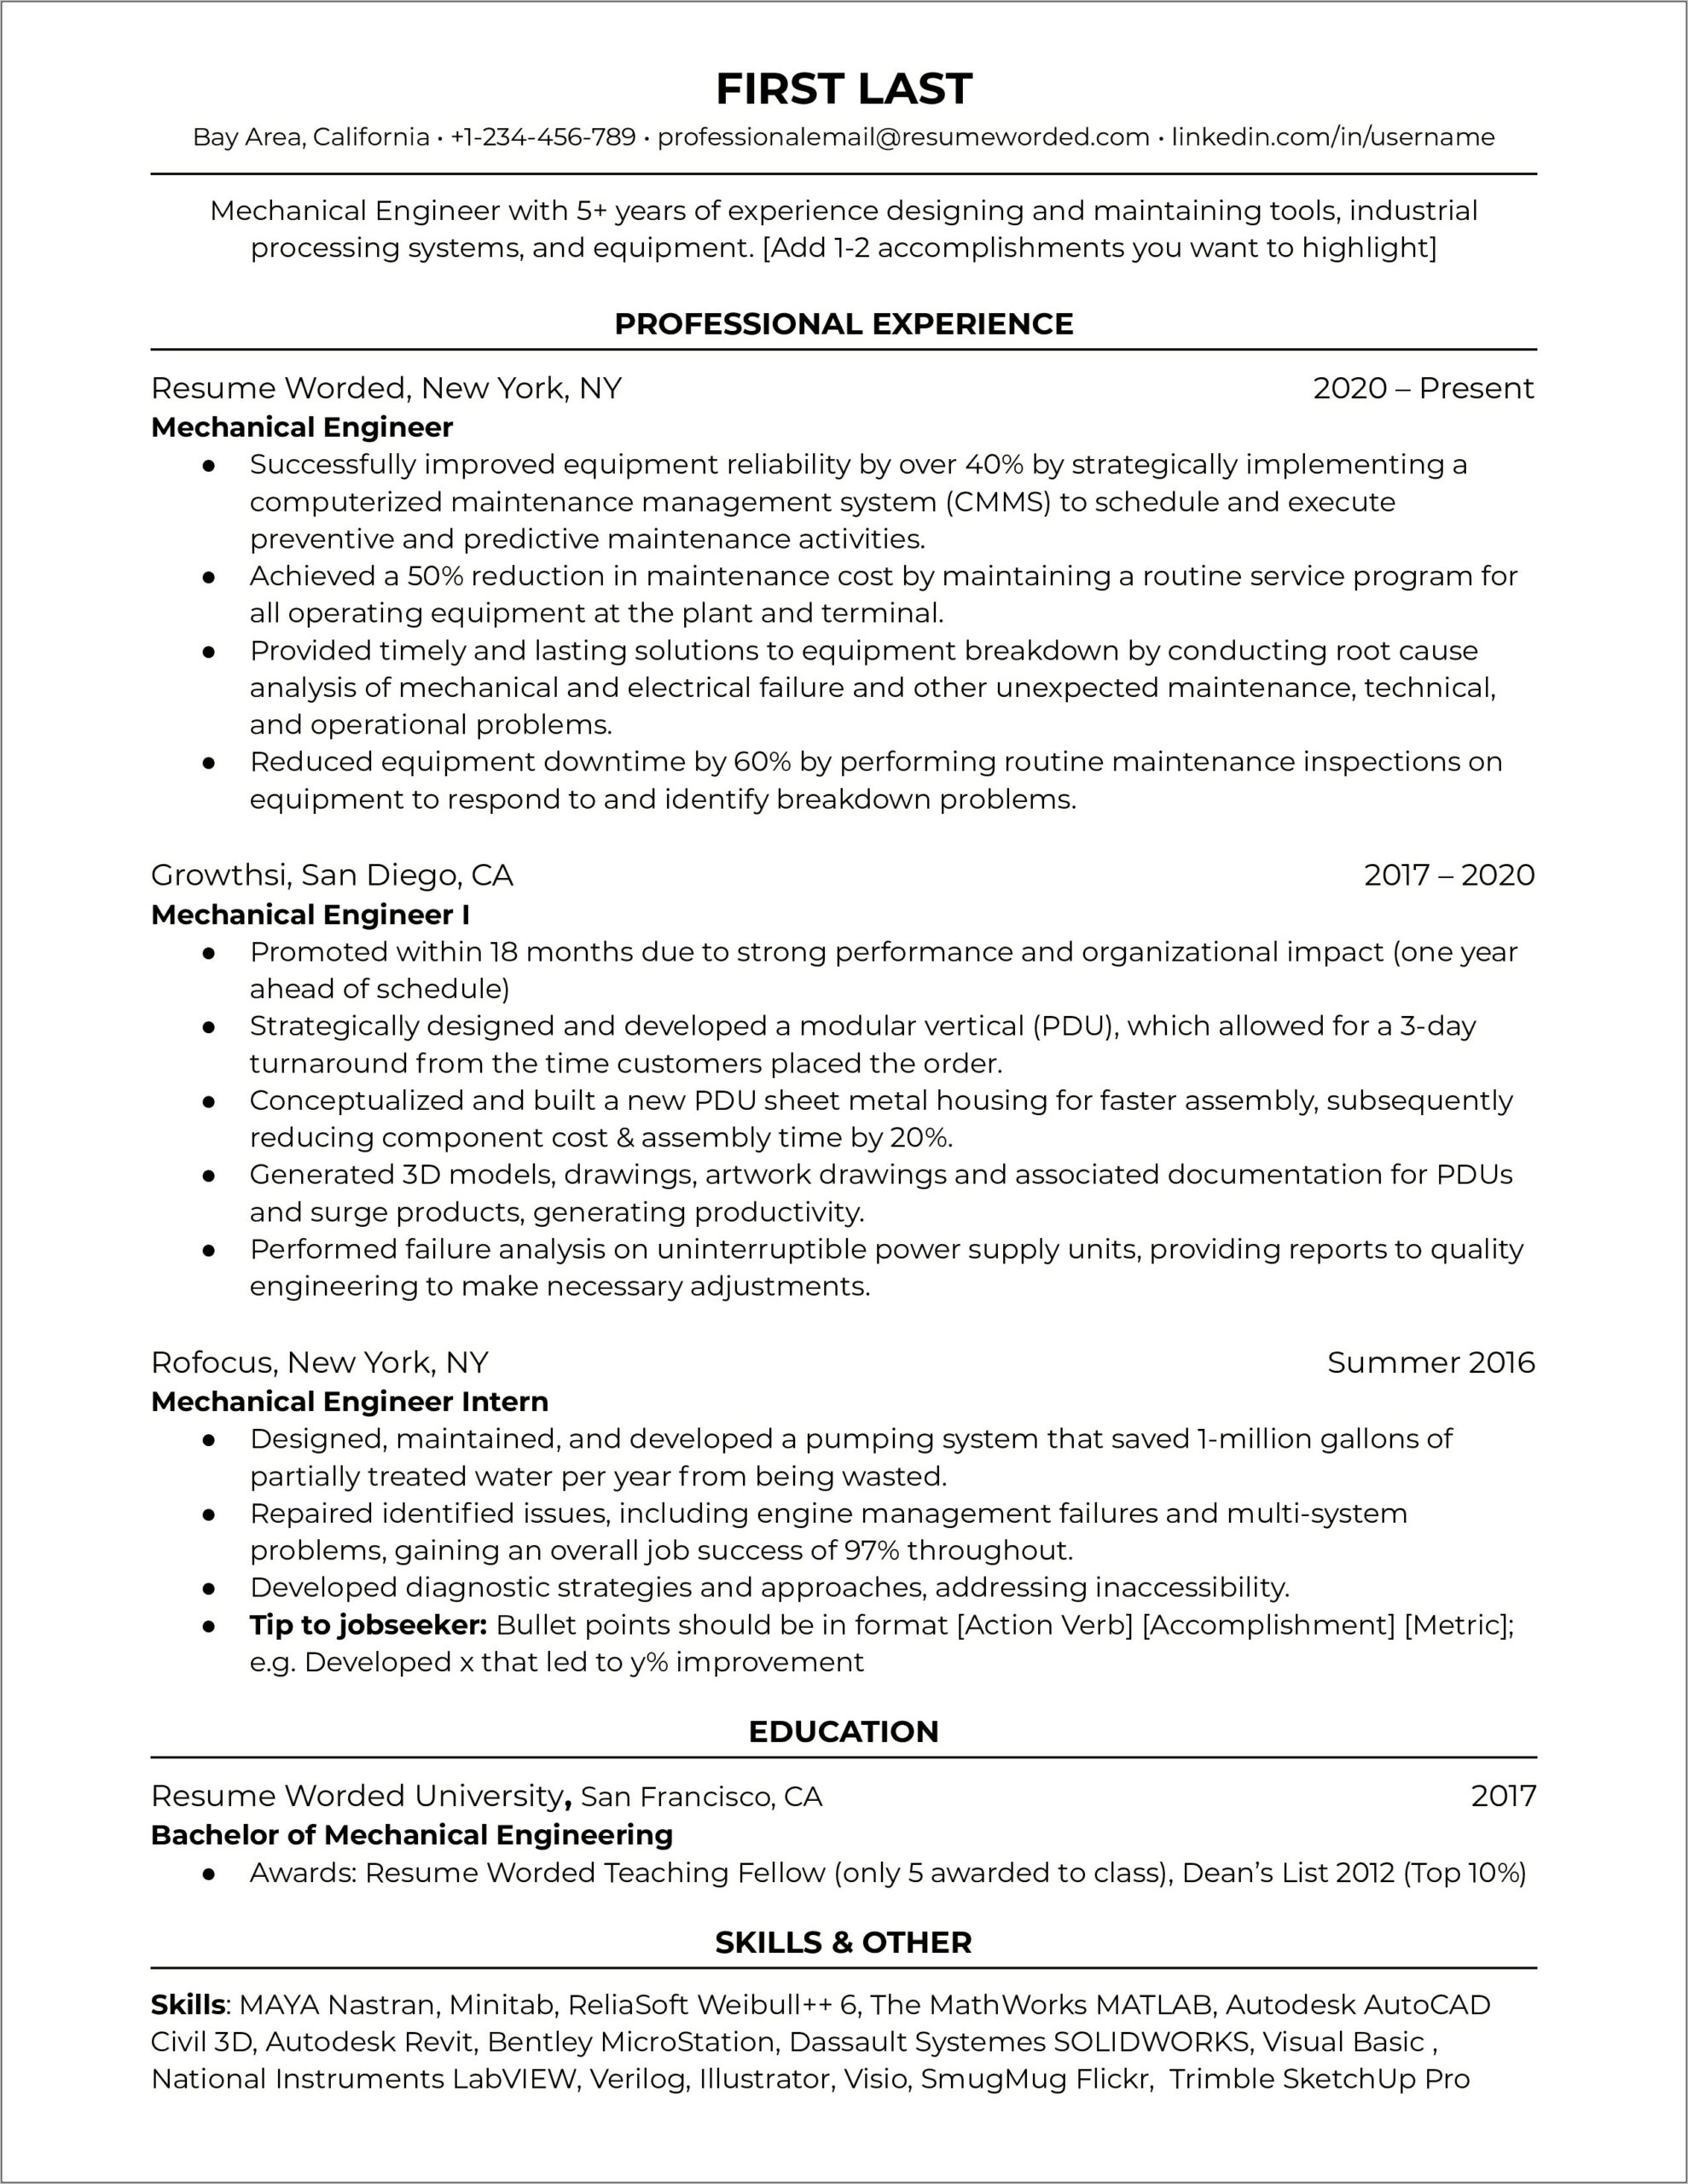 1 Year Experience Resume For Mechanical Engineer